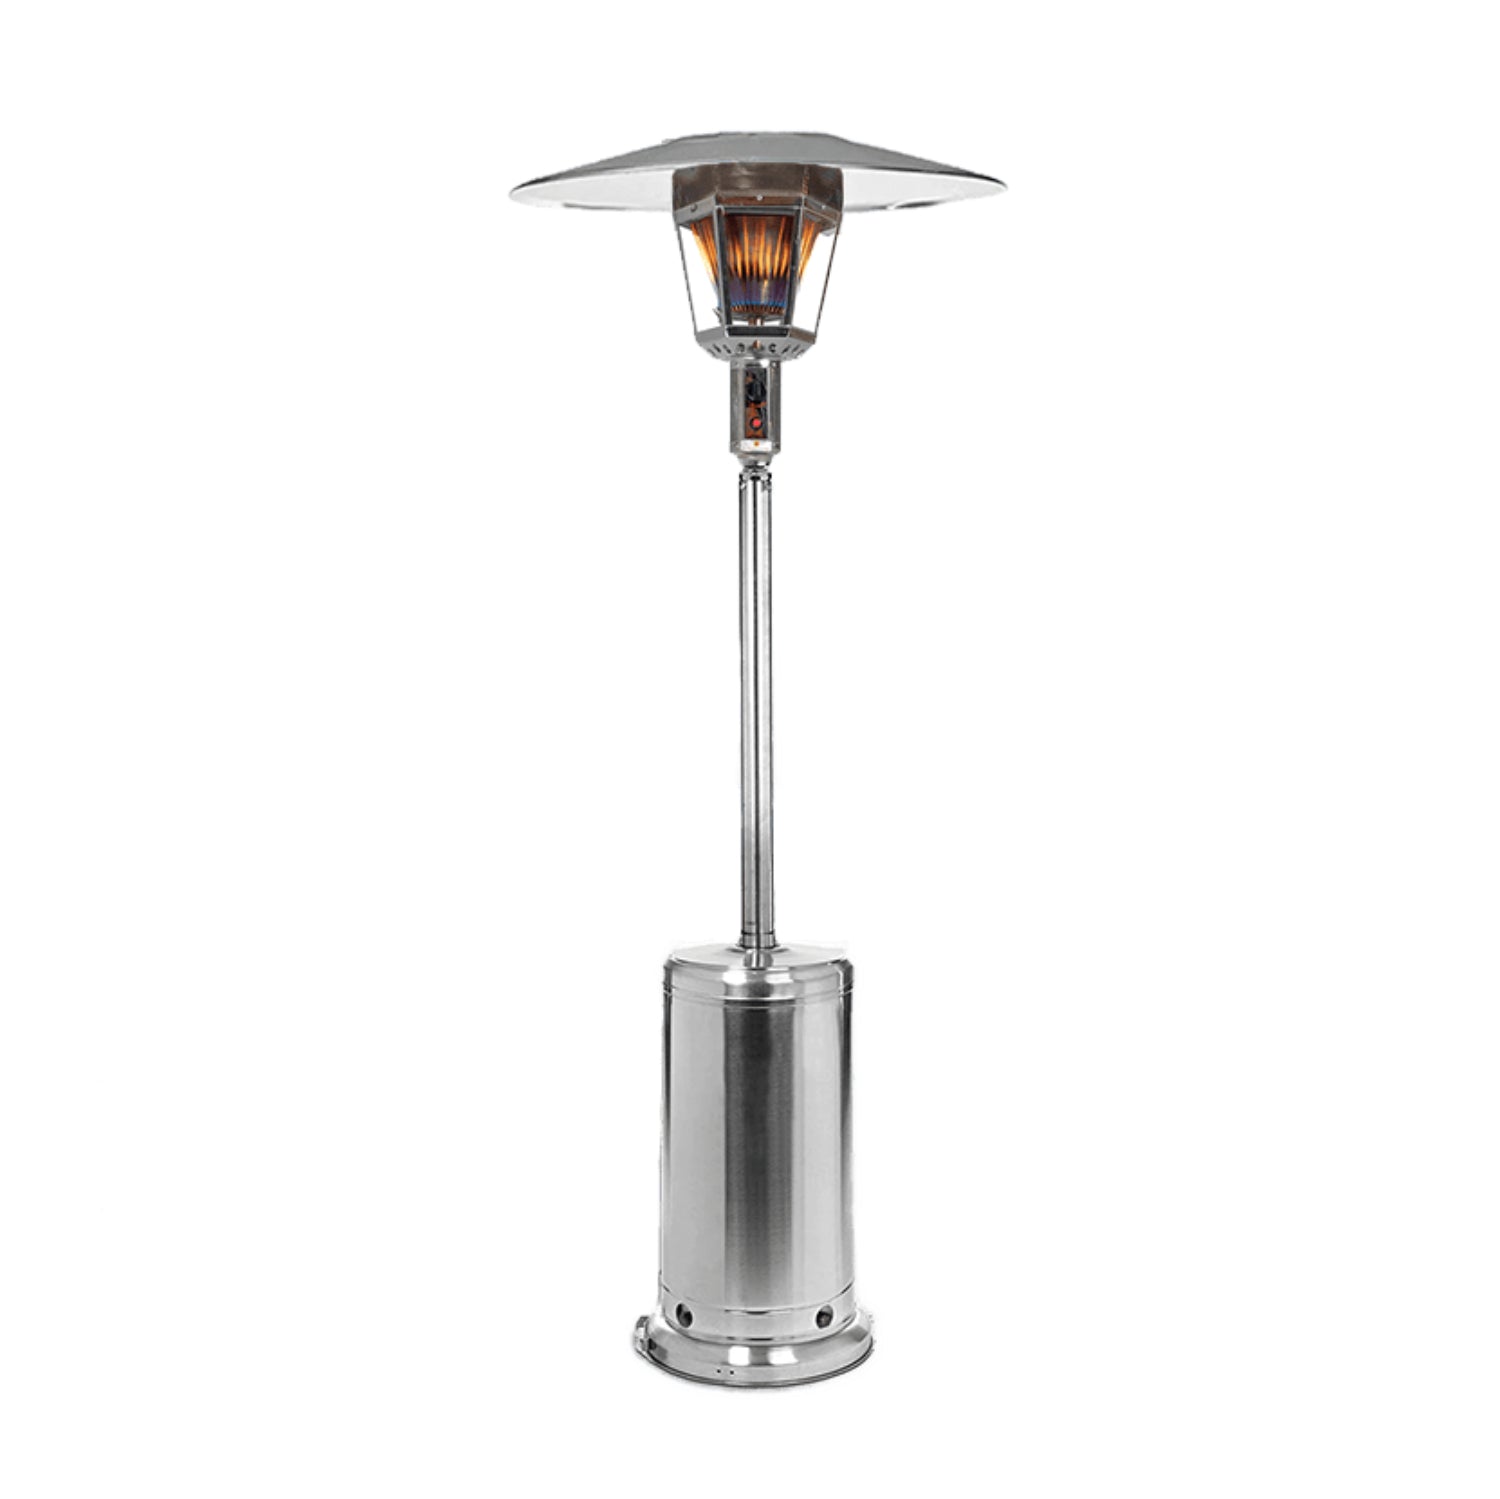 RADtec 96" Real Flame Propane Patio Heater - Stainless Steel Finish 1